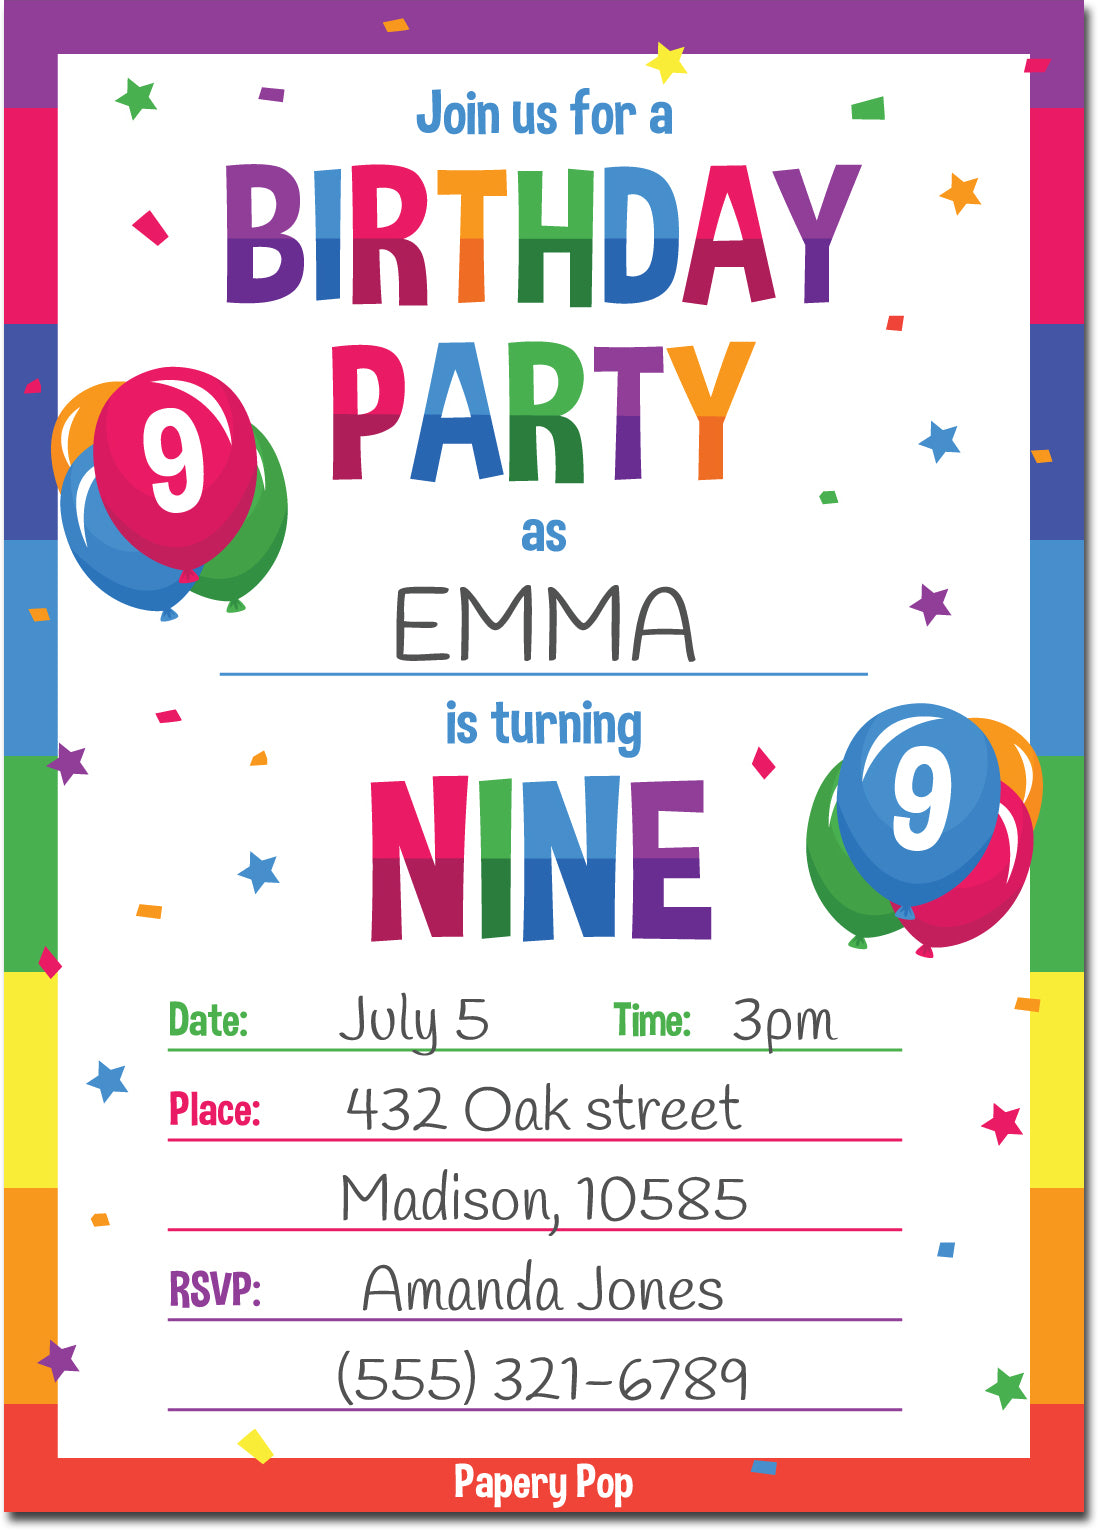 9-year-old-birthday-party-invitations-with-envelopes-15-count-kids-papery-pop